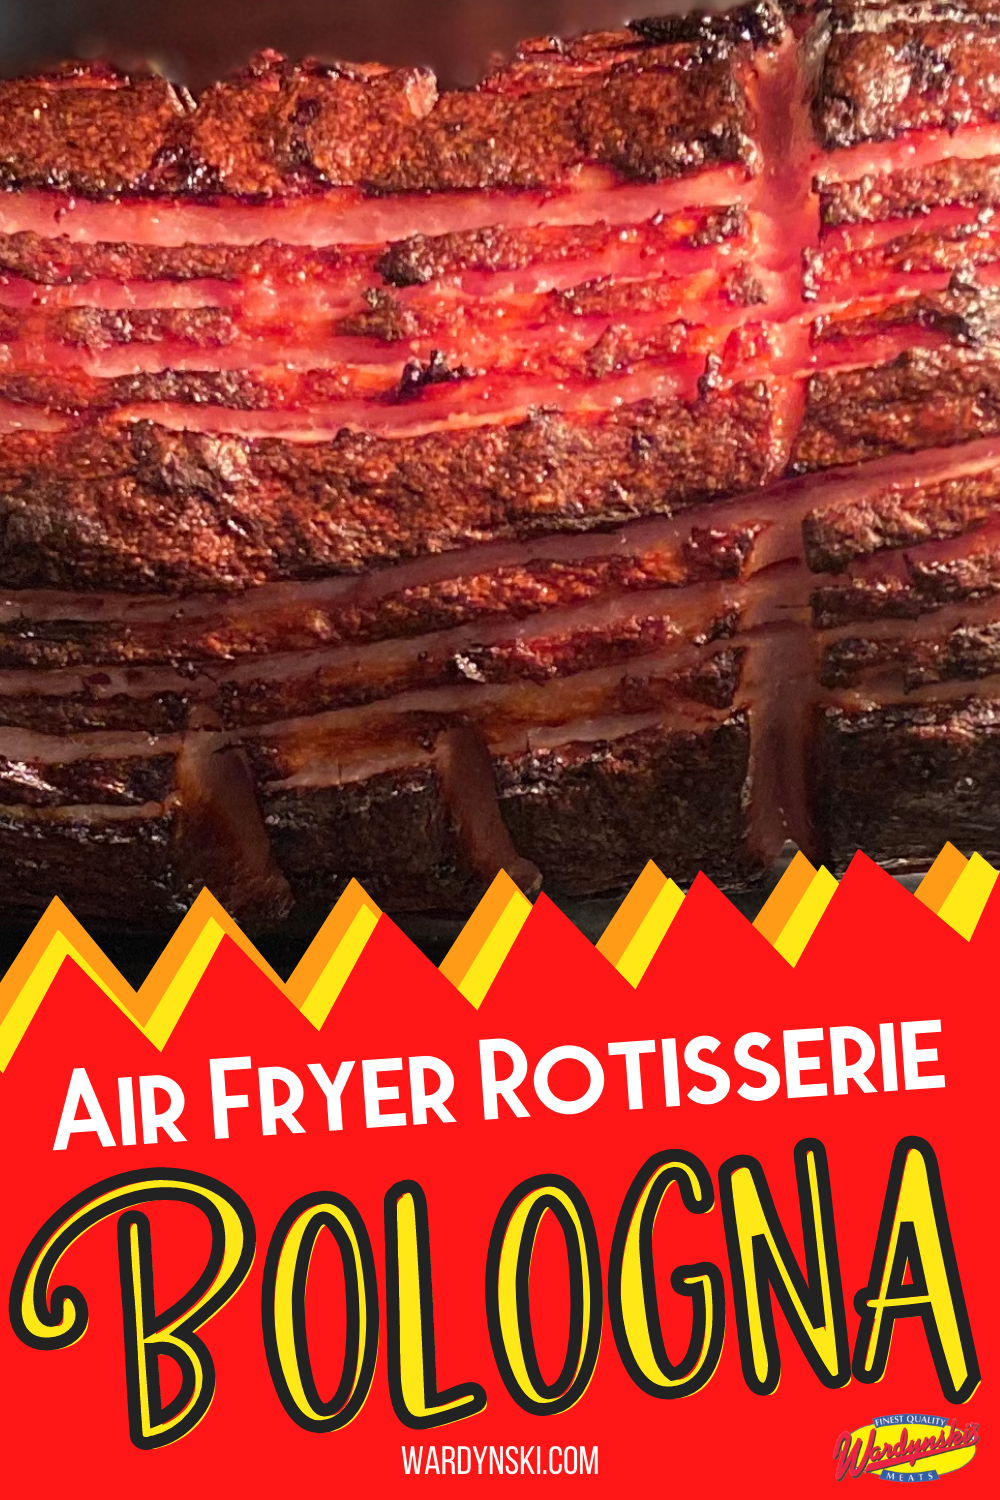 This easy air fryer recipe makes rotisserie bologna easy to make at home!